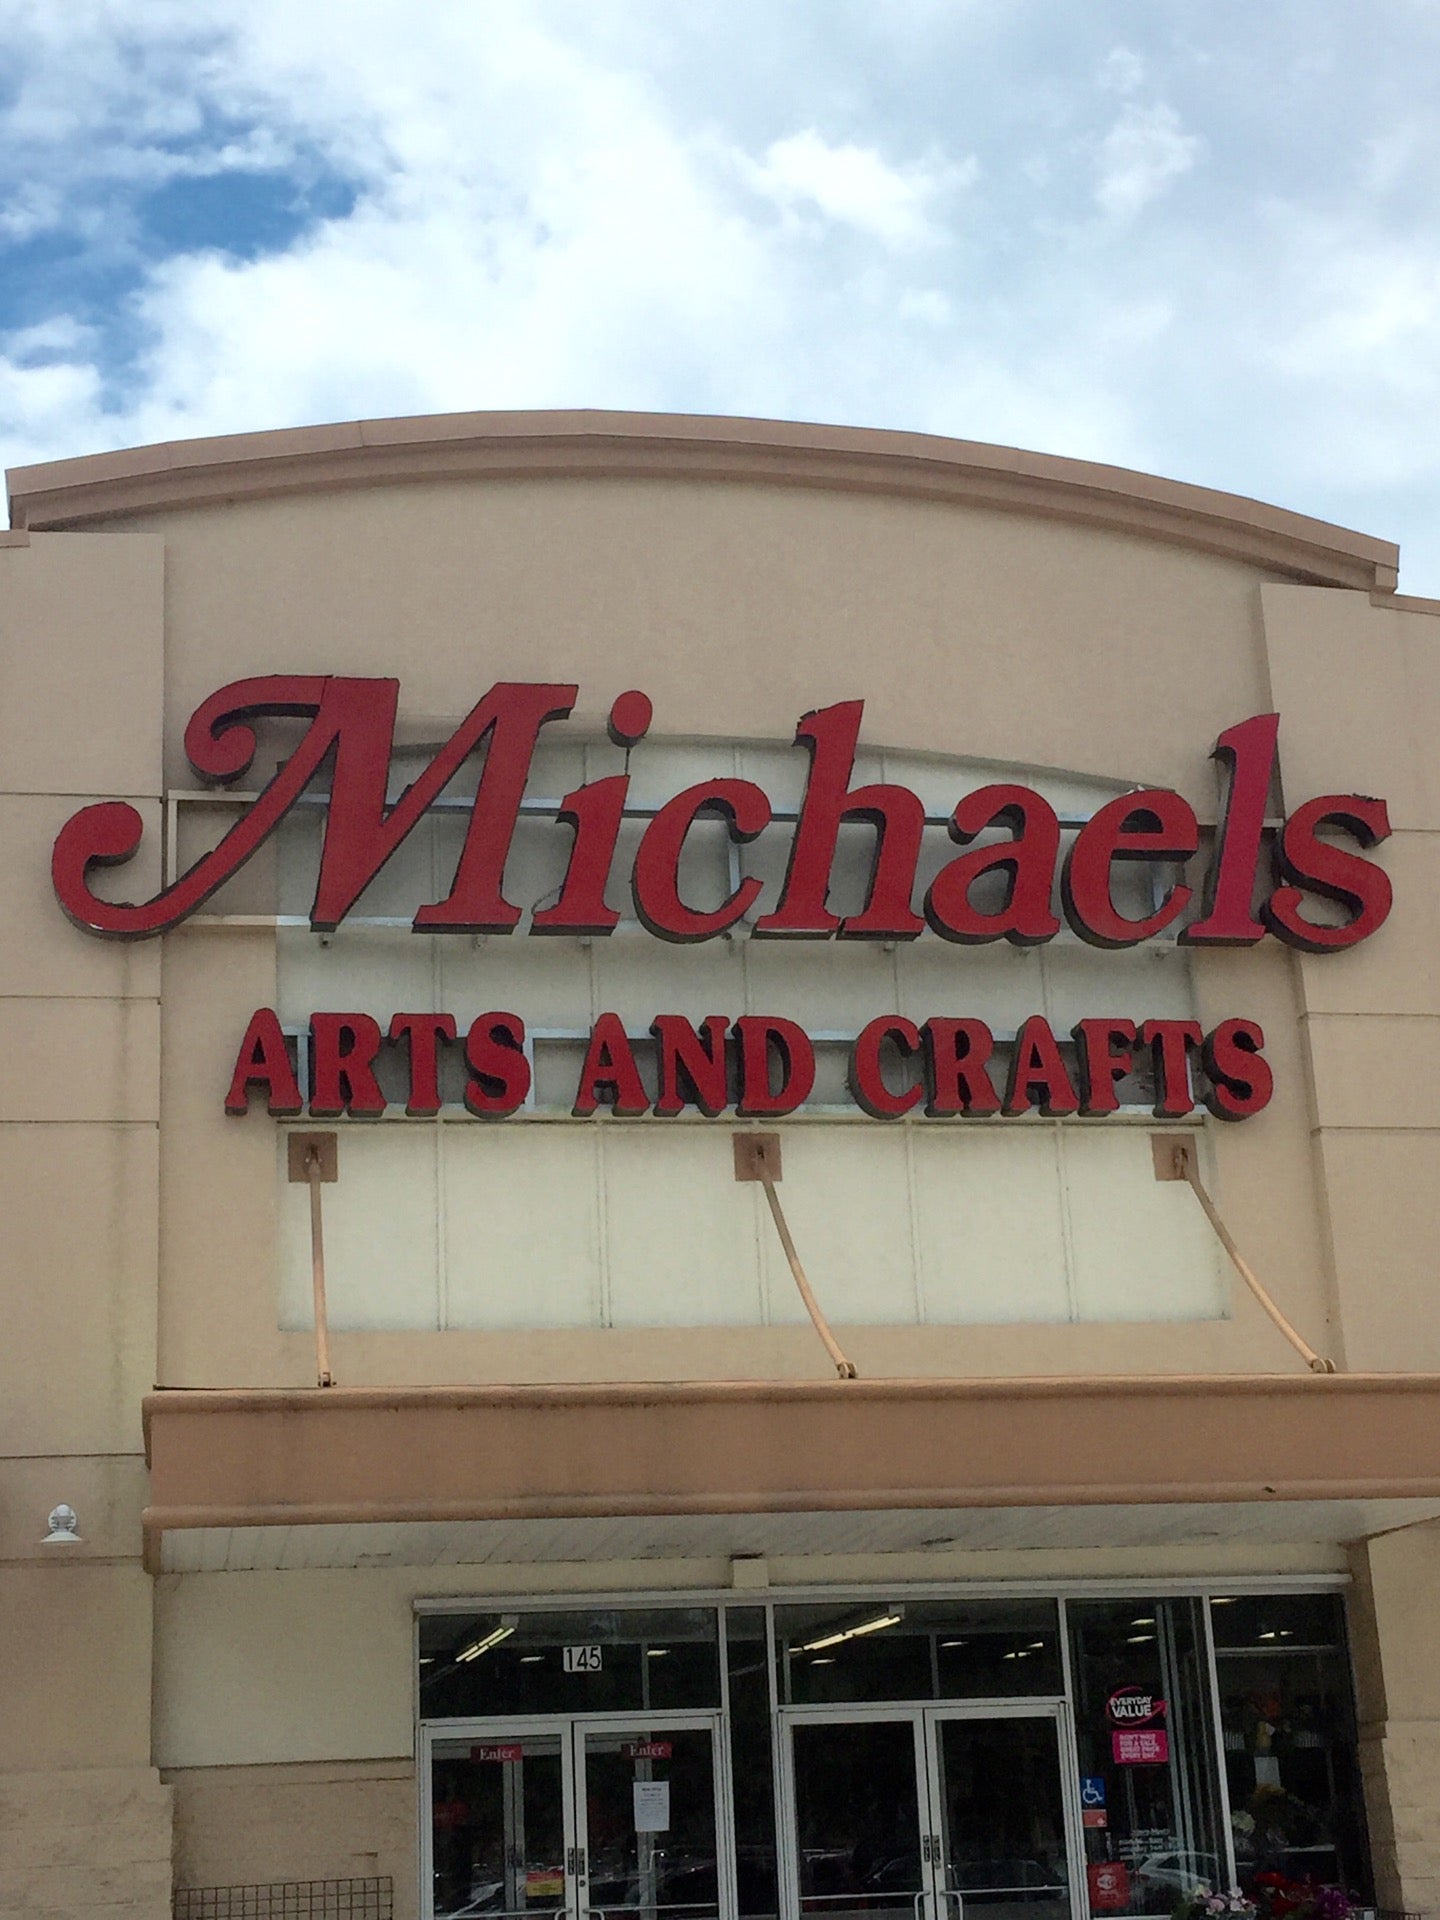 The Michaels arts and crafts store, Oviedo, FL, has everything to